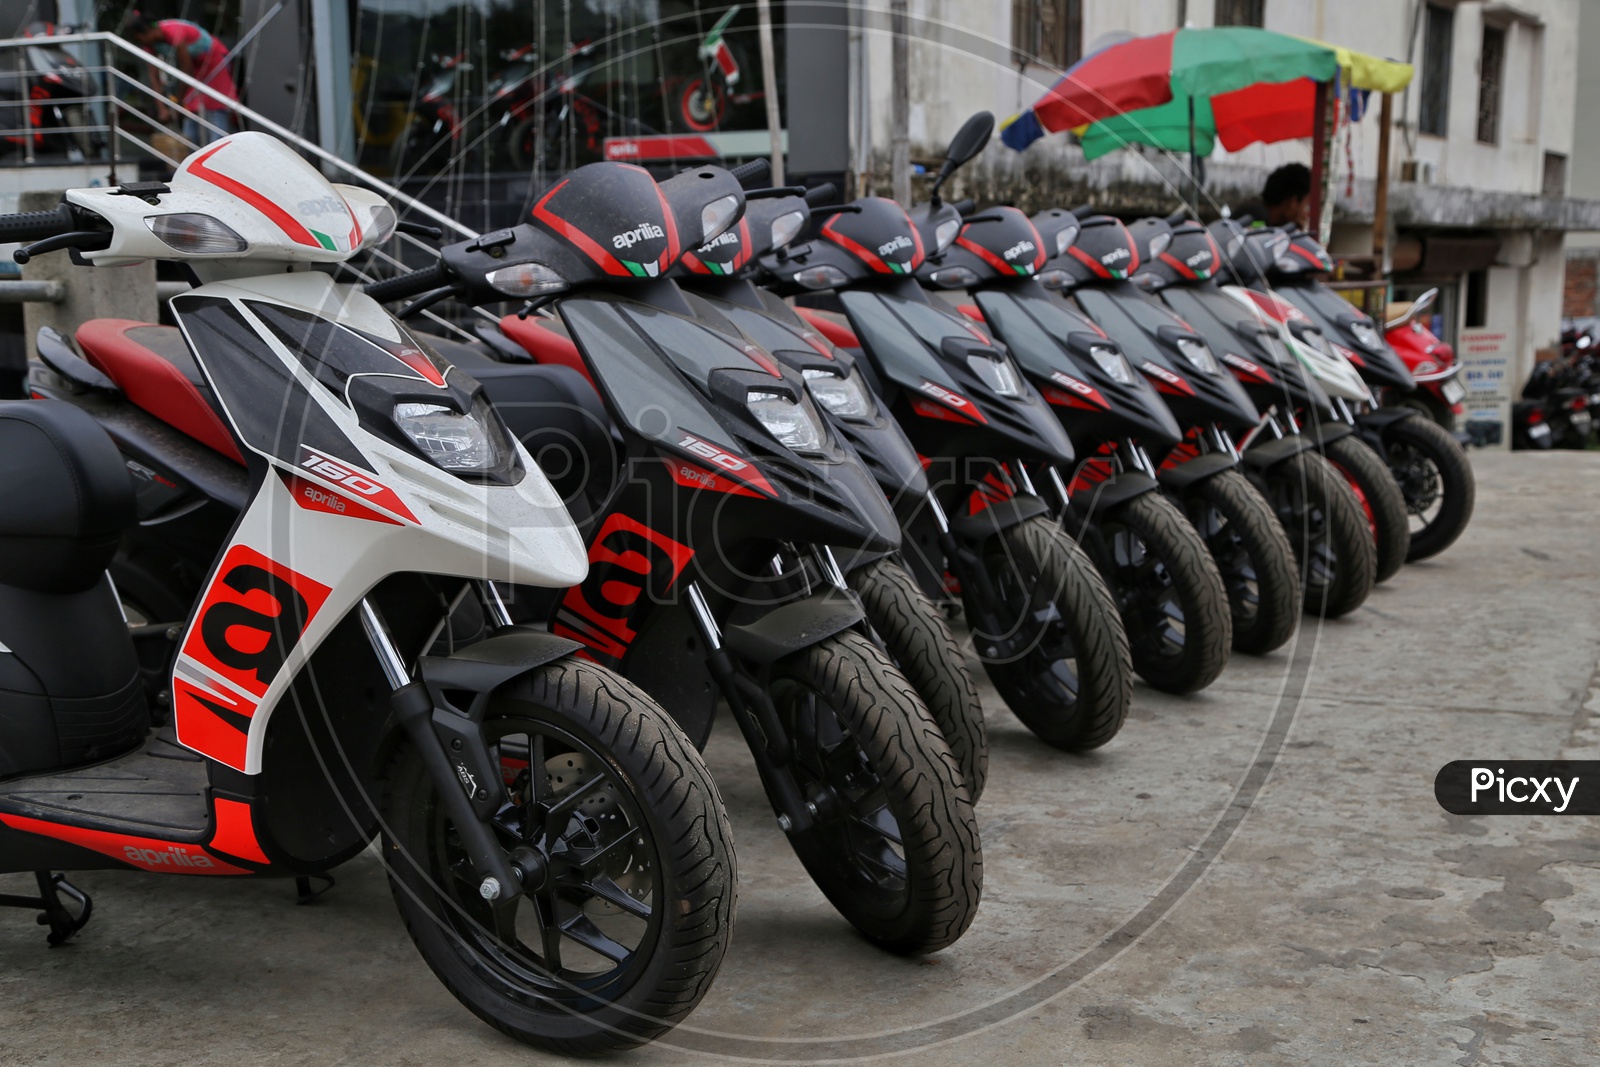 Yamaha Aprilla  Scooty or Mopeds   Parked At a Showroom